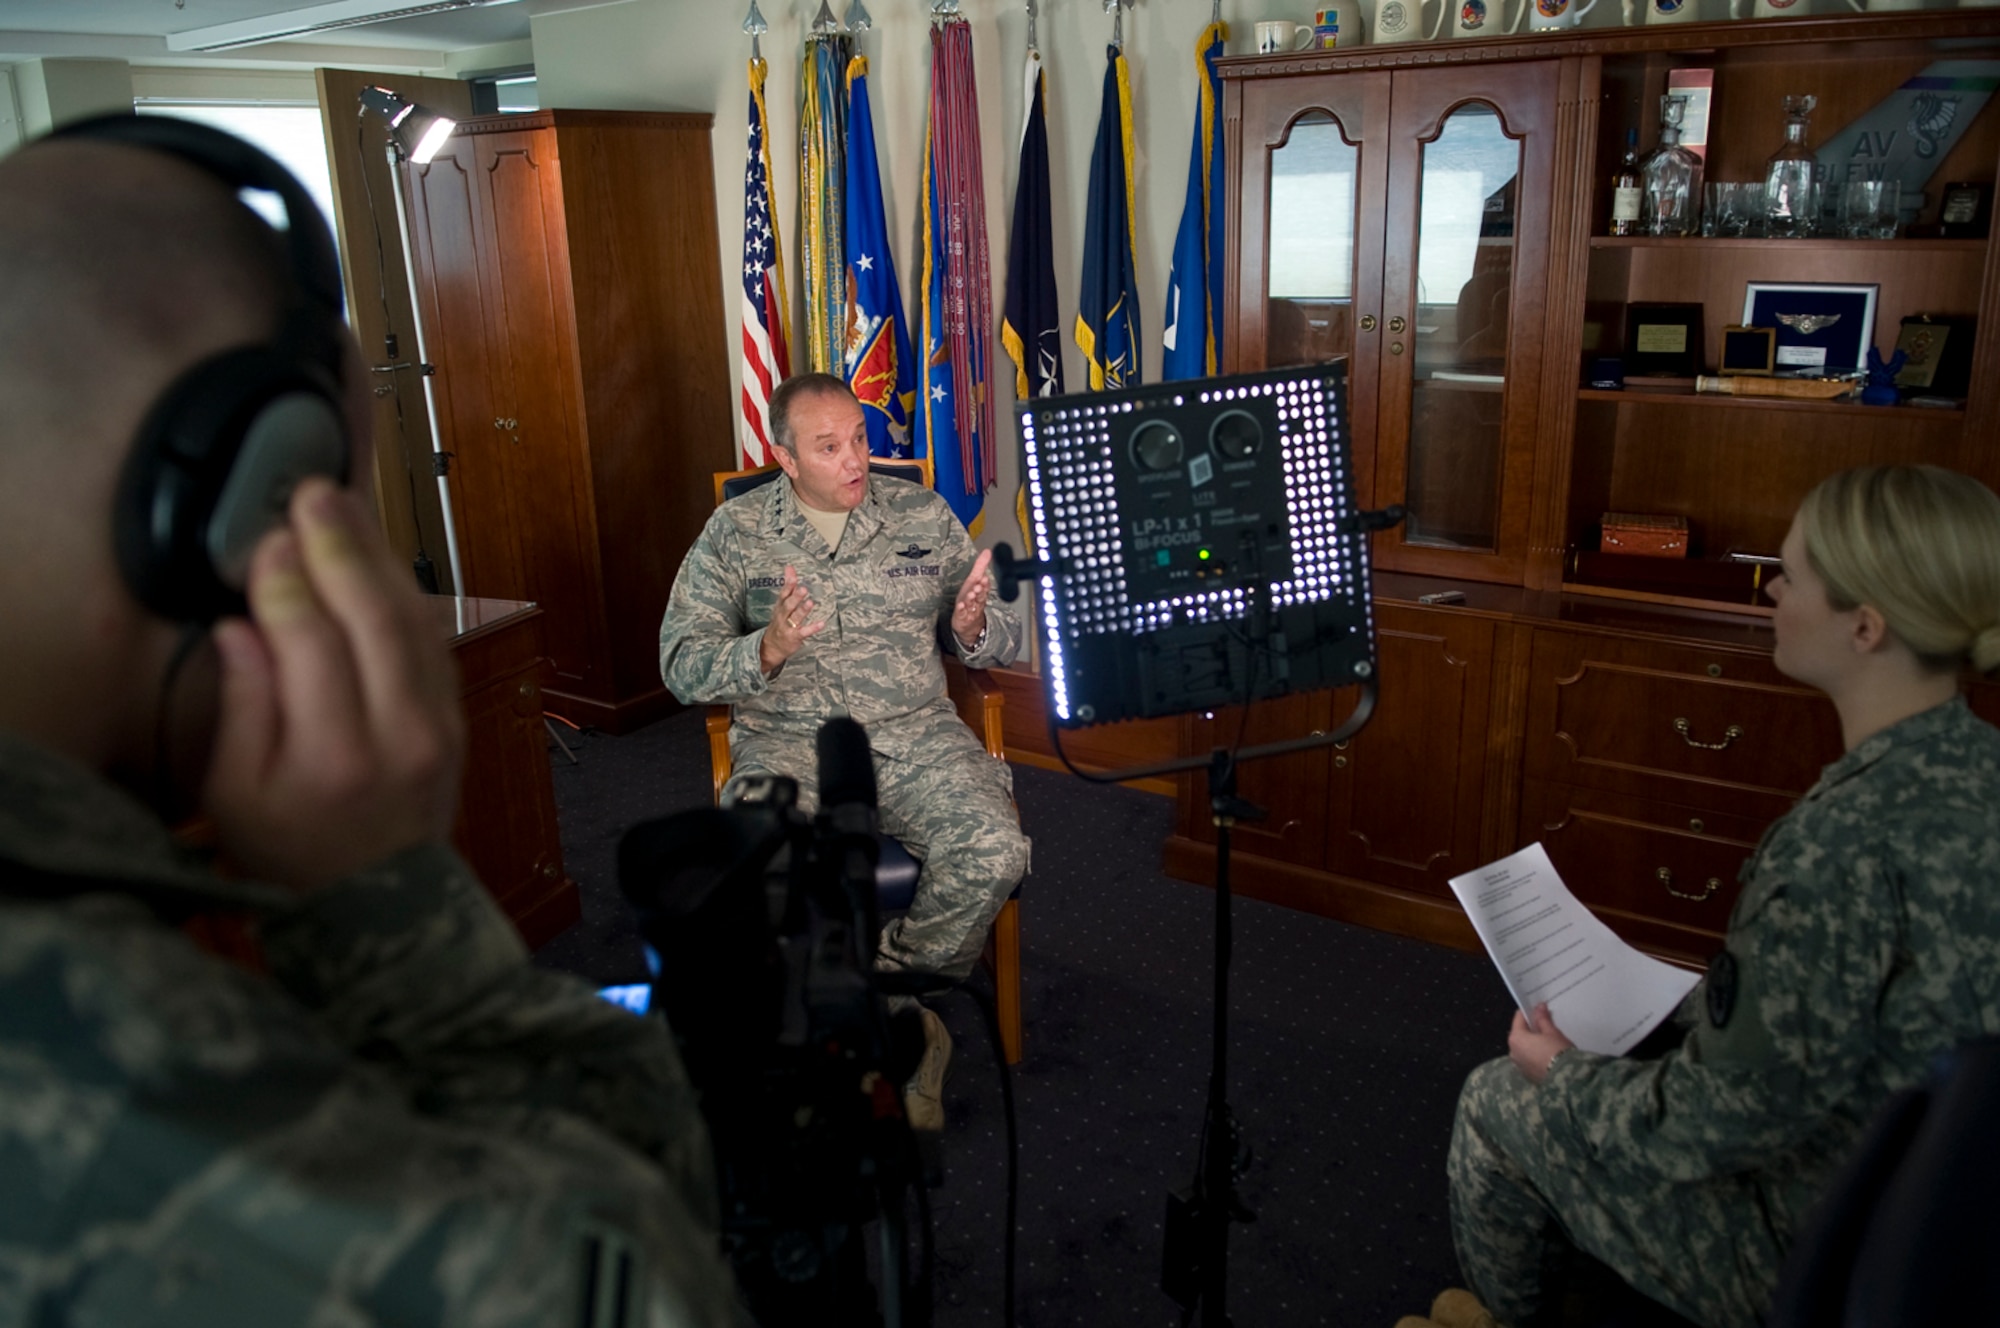 U.S. Army Sgt. Abigail Waldrop and Airman 1st Class Aaron Richardson, American Forces Network broadcasters, interview Gen. Philip M. Breedlove, U.S. Air Forces in Europe and Air Forces Africa, April 25, 2013, as he prepares to take command of U.S. European Command and NATO’s Supreme Headquarters Allied Powers Europe. Breedlove is scheduled to take command of EUCOM in a ceremony May 10 at Patch Barracks, Stuttgart, Germany.  A separate ceremony will be held for the NATO post. (U.S. Air Force photo by Master Sgt. Wayne Clark)